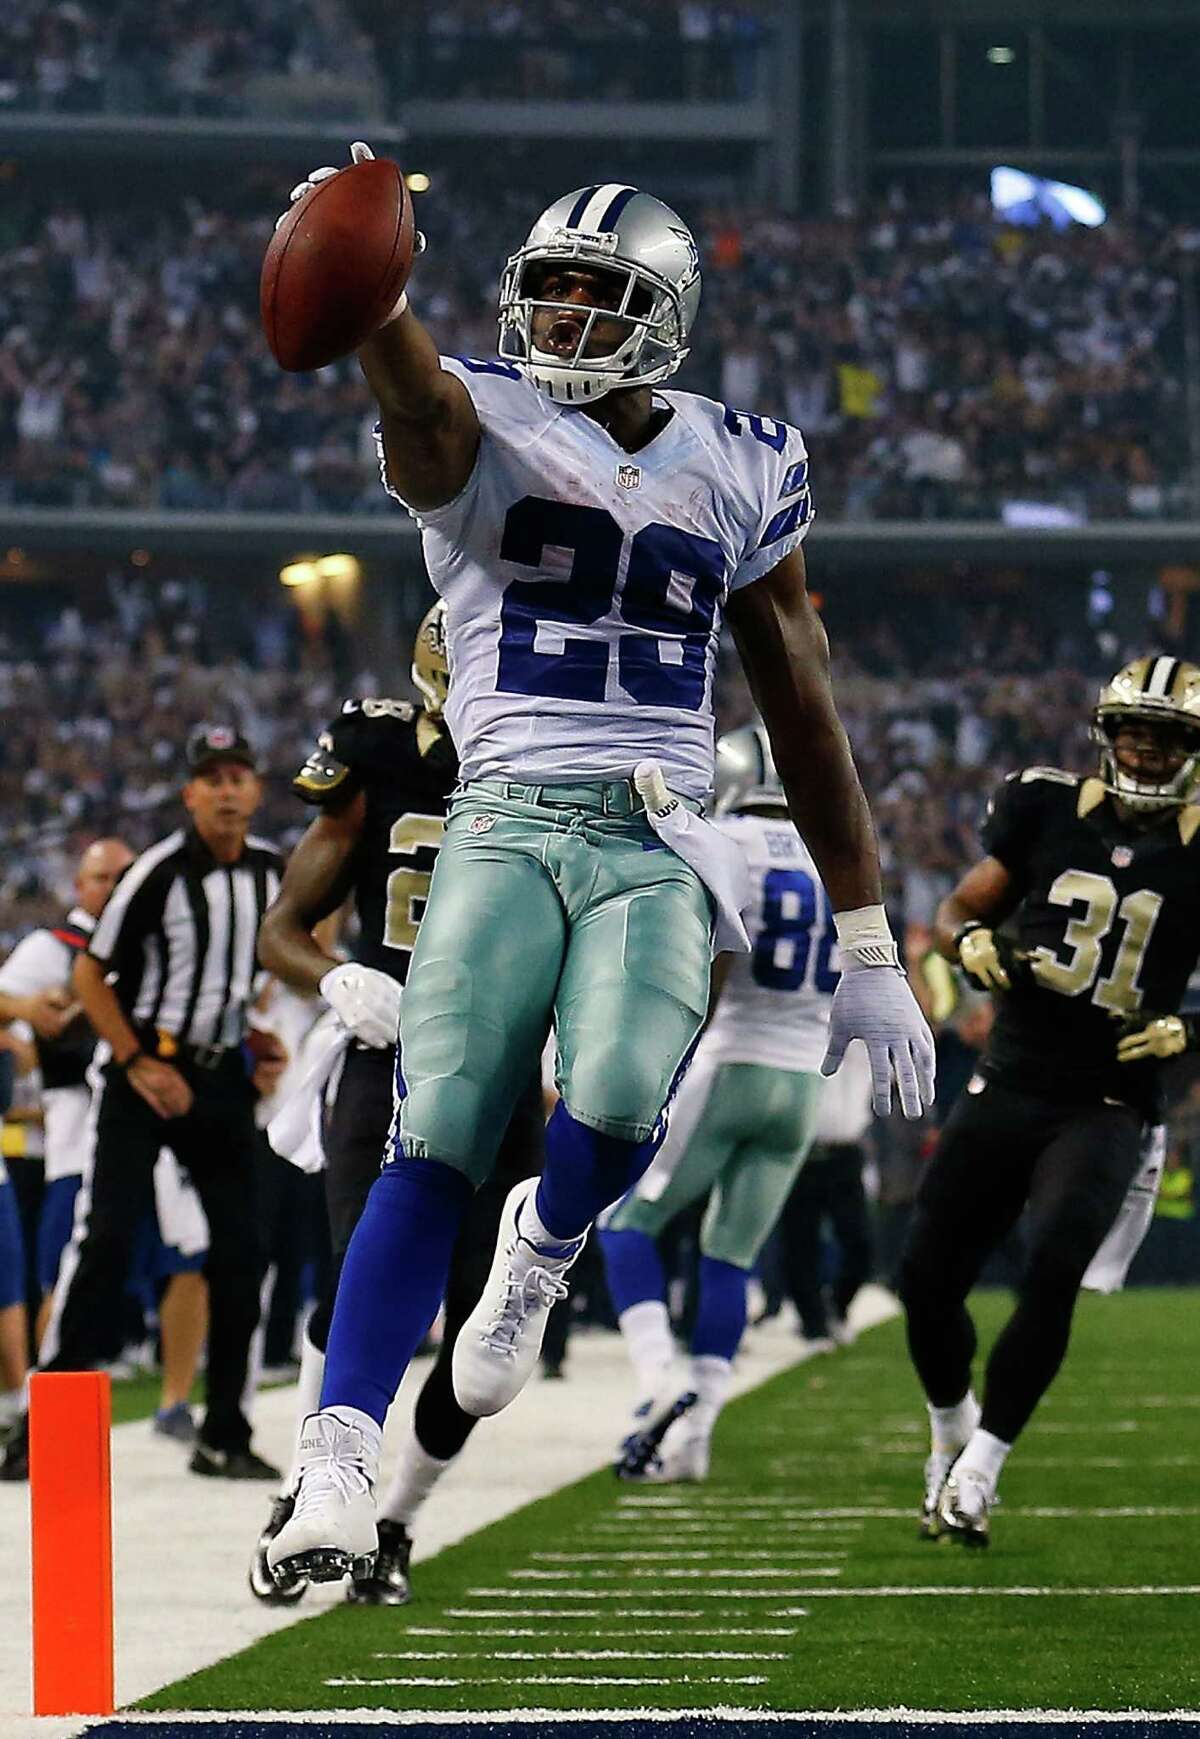 DeMarco Murray, the NFL's leading rusher, rushed for 149 yards and scored two touchdowns against the Saints.